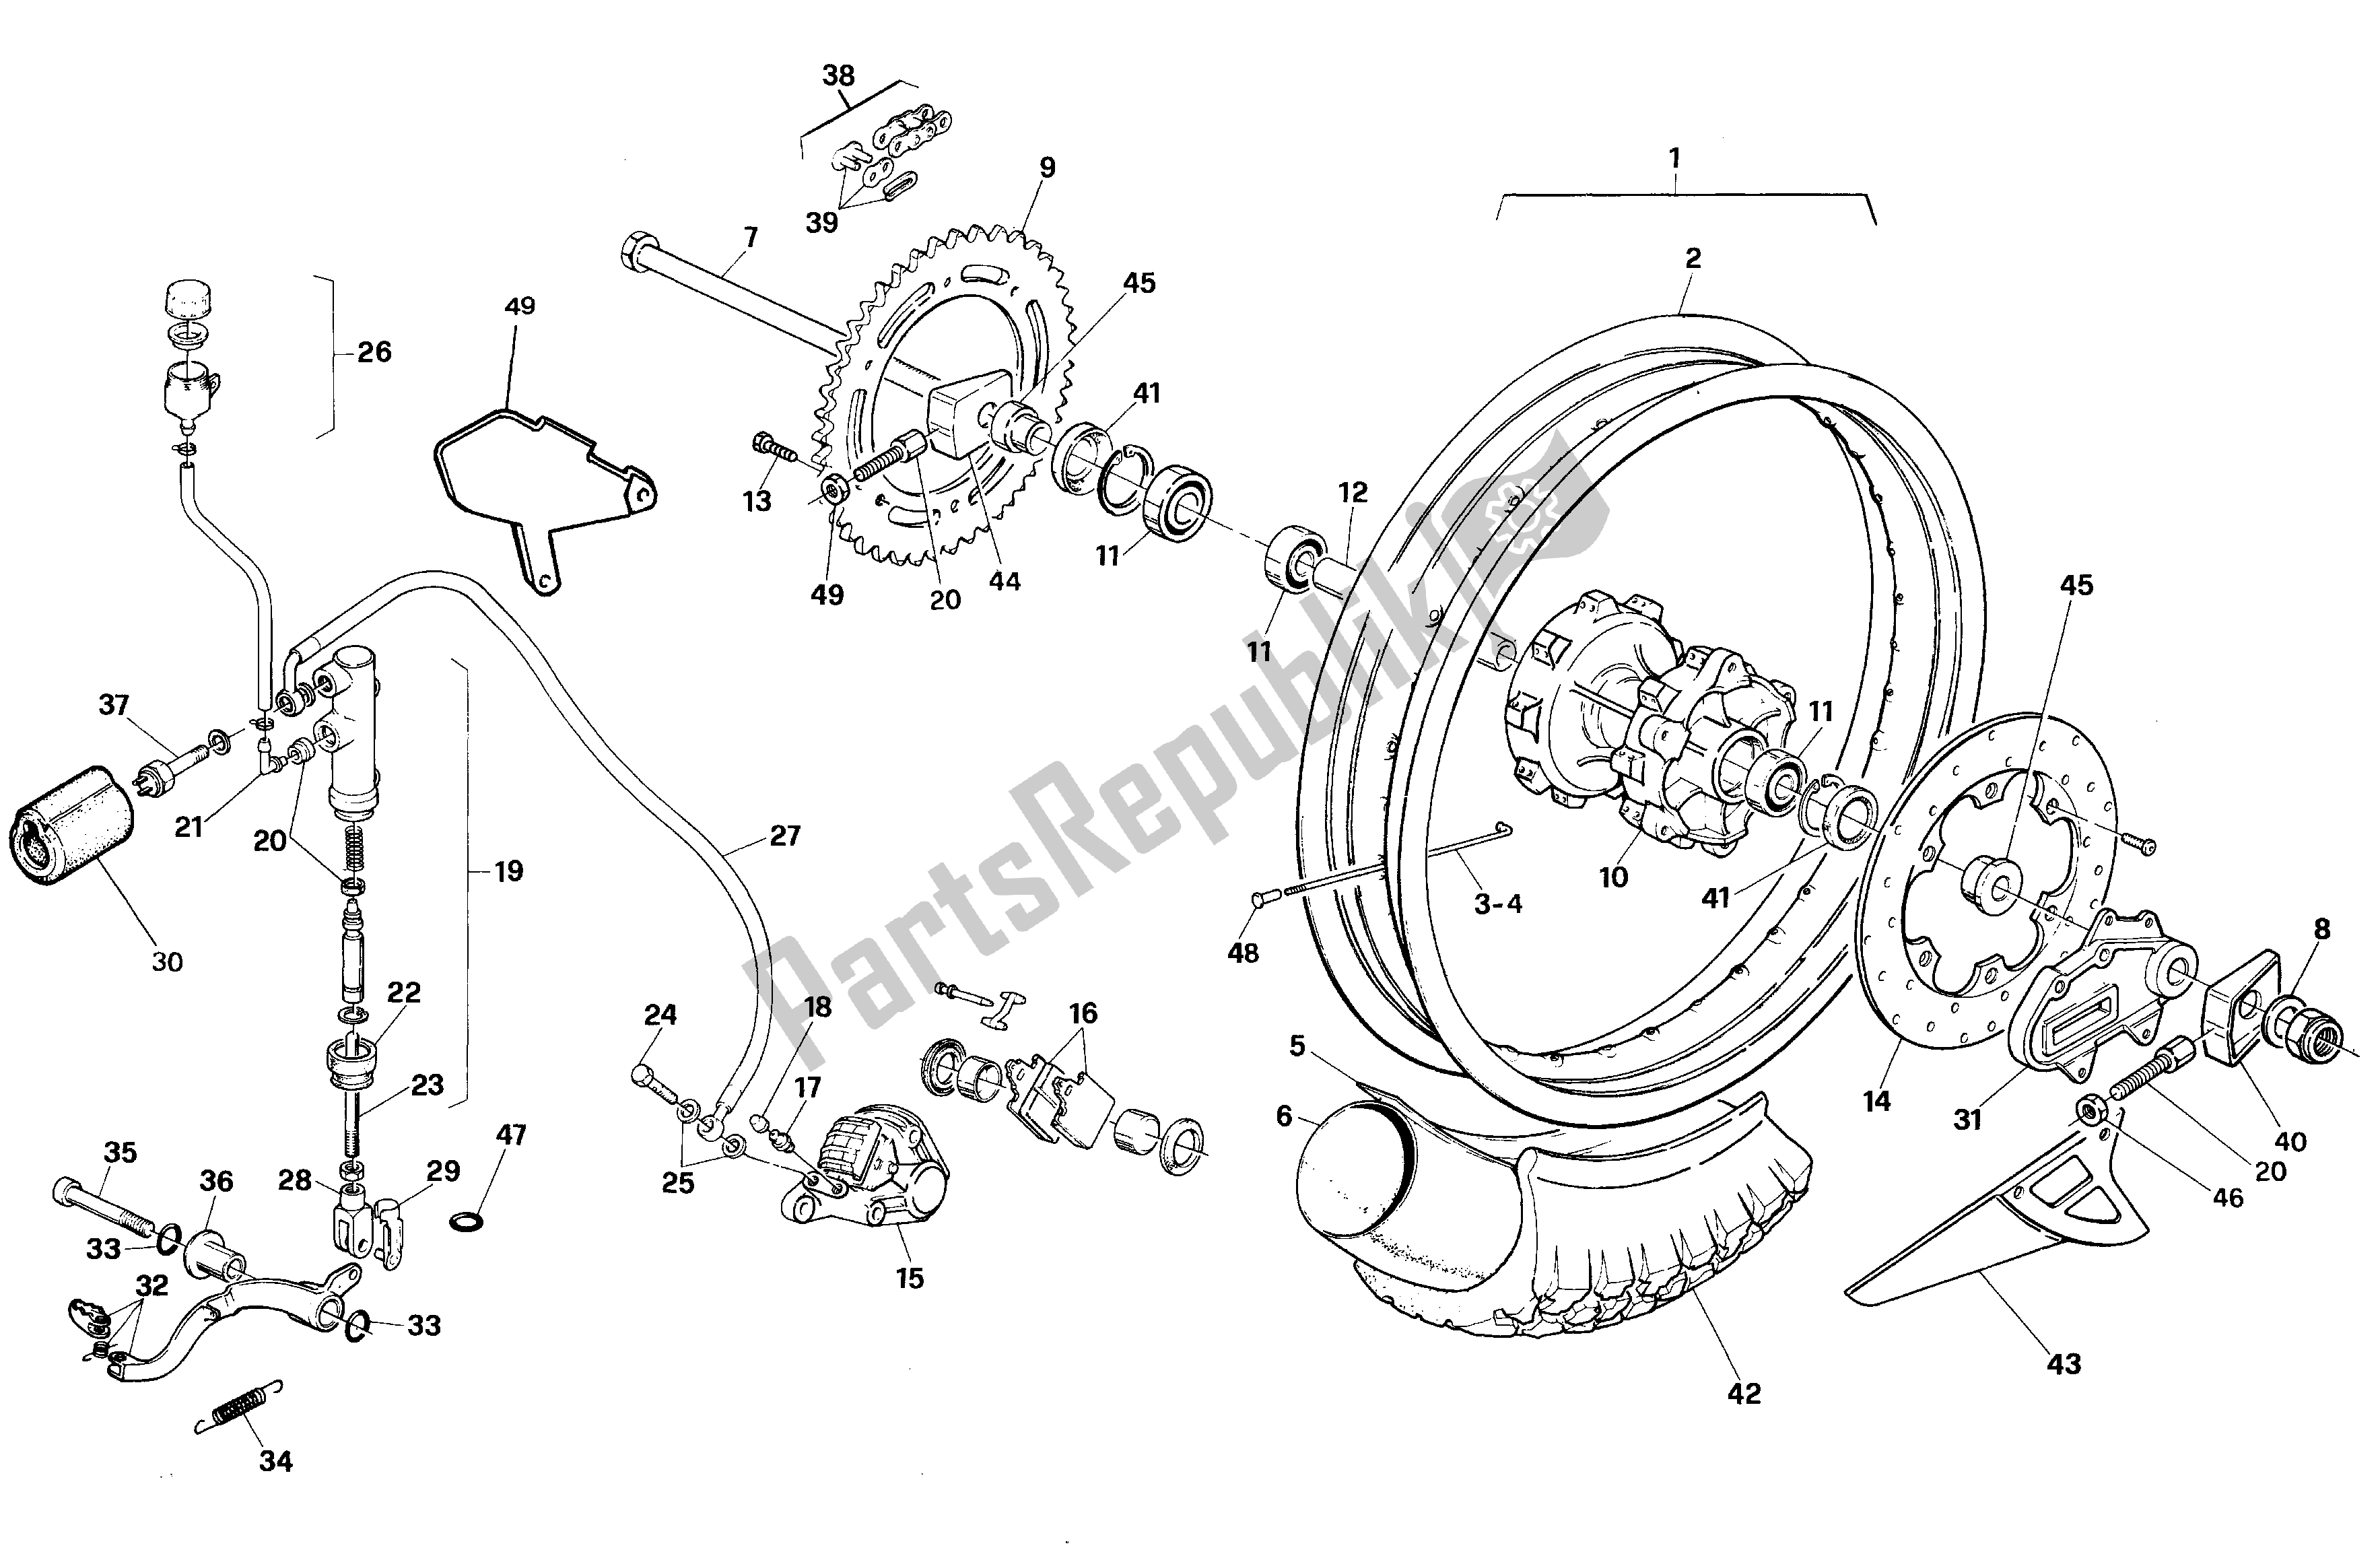 All parts for the Rear Wheel of the Aprilia RX 125 1994 - 1998